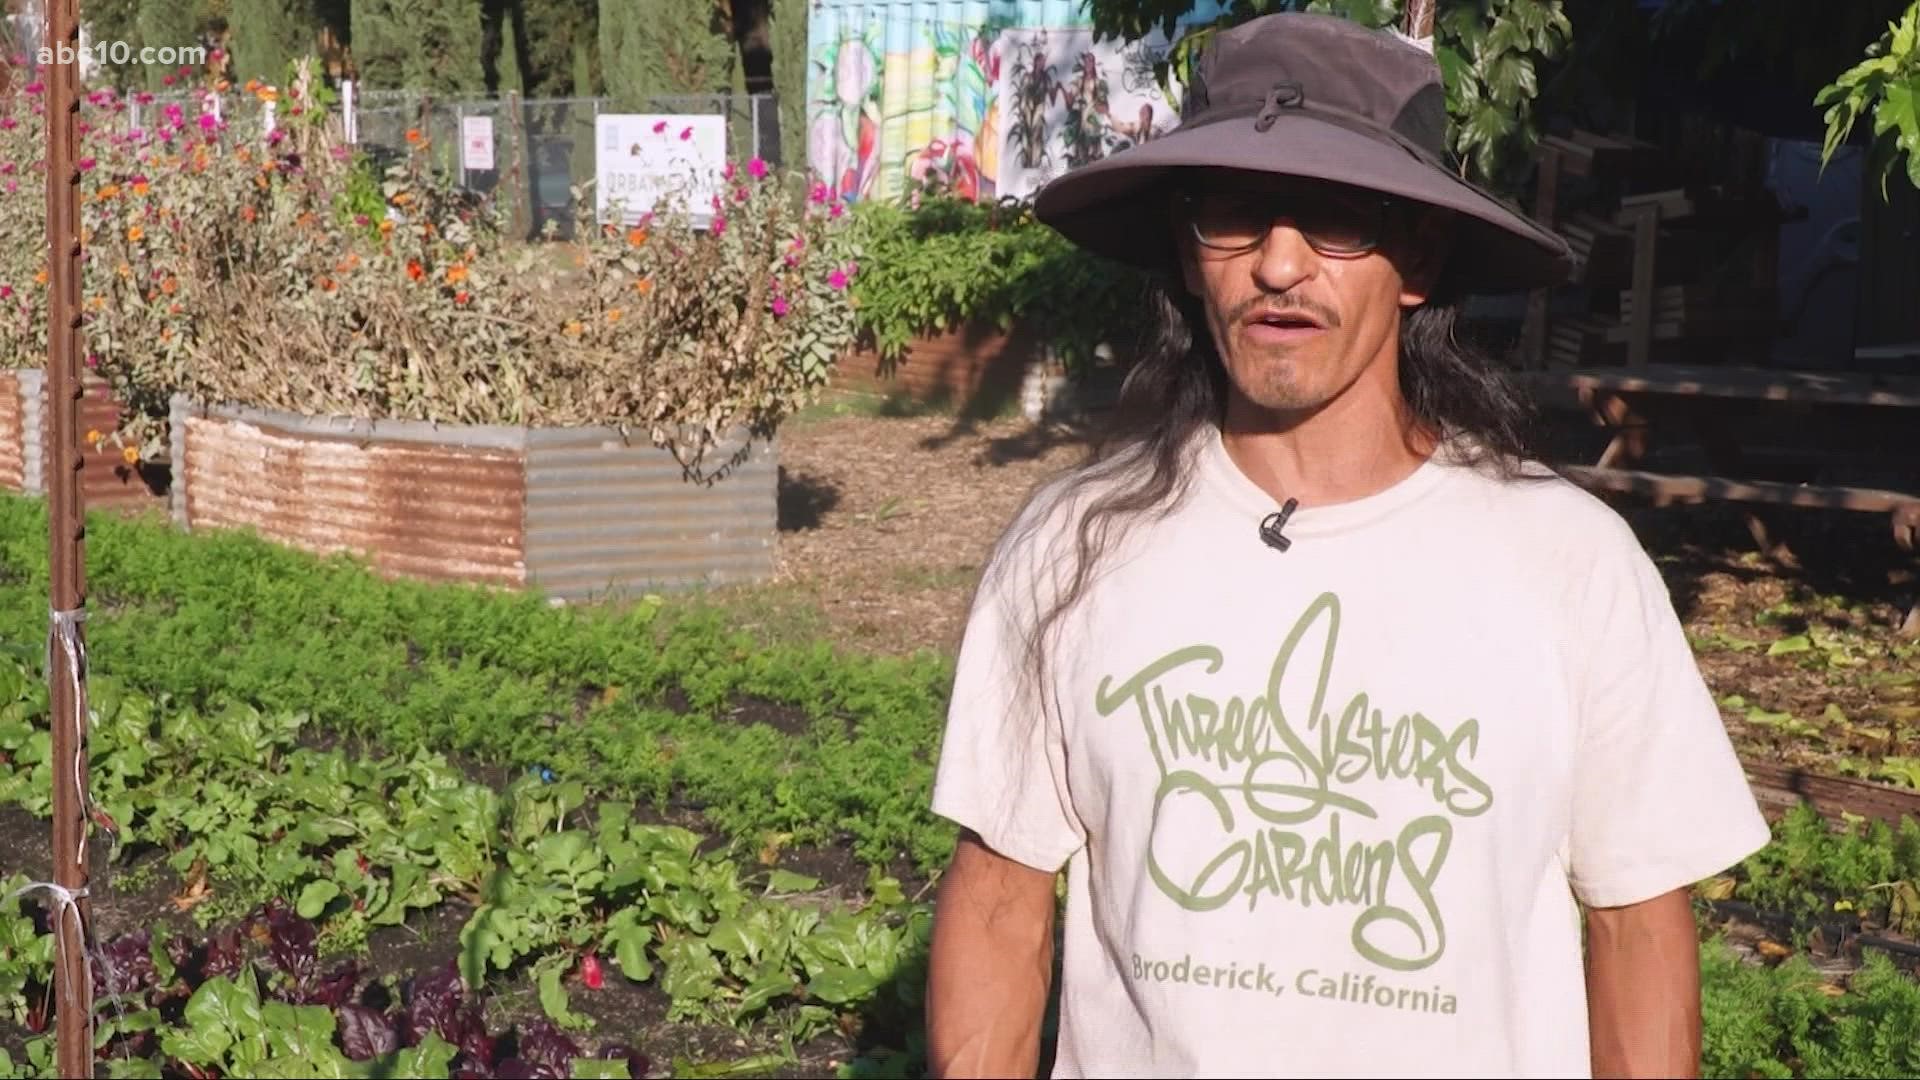 The founder of Three Sisters Gardening based in West Sacramento said he wants to connect youth with the 'Earth Mother' by teaching traditional regenerative growth.